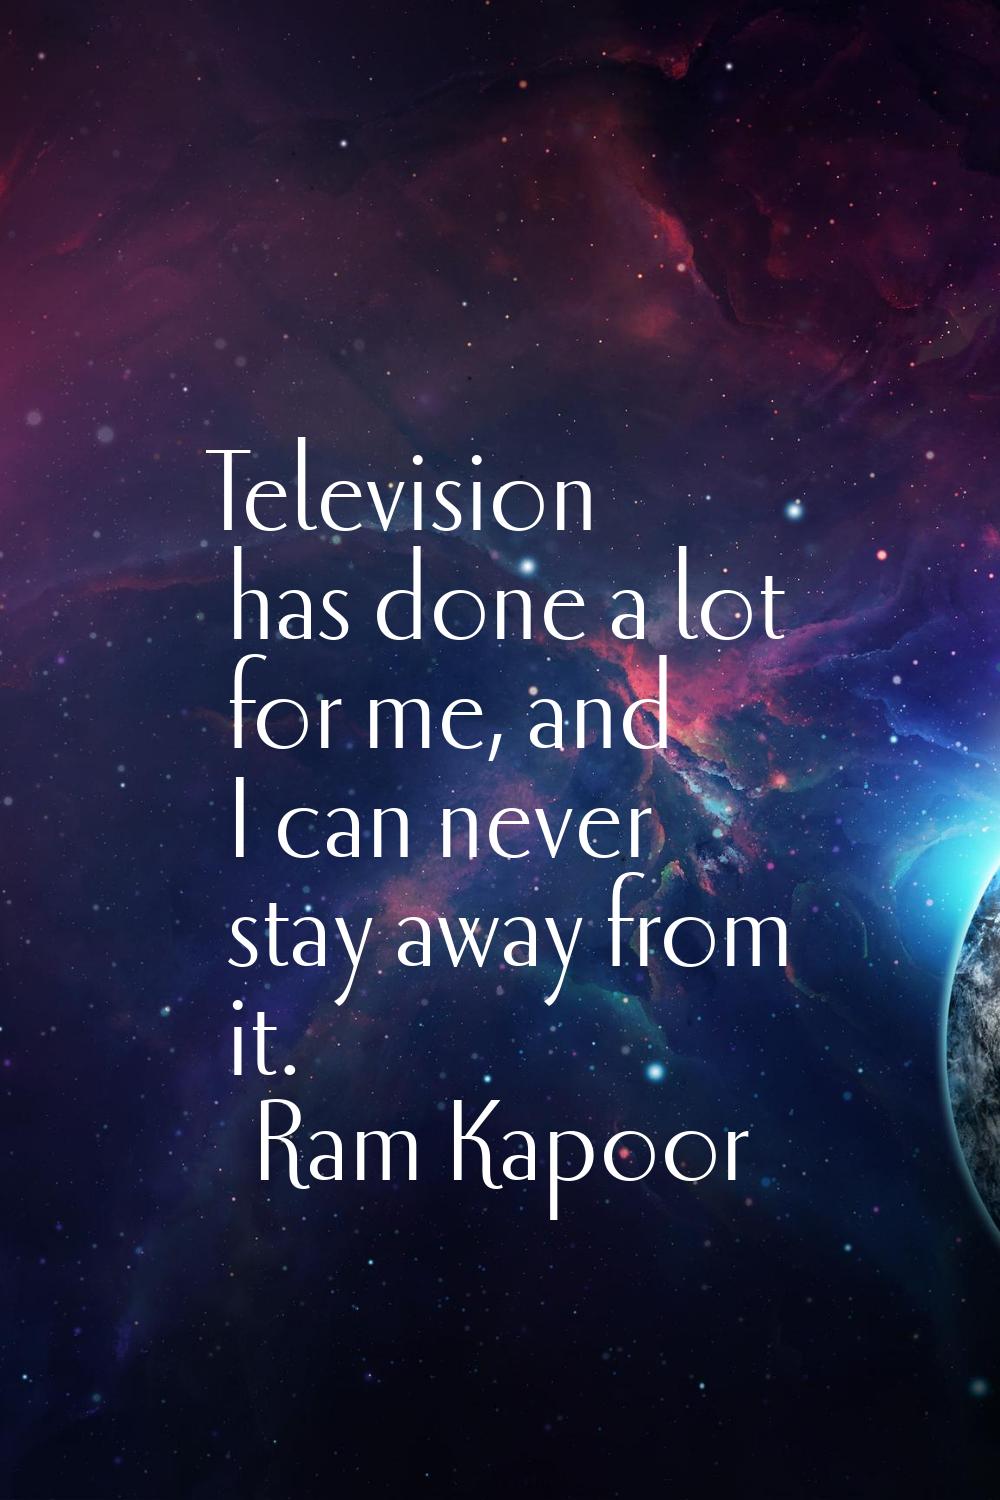 Television has done a lot for me, and I can never stay away from it.